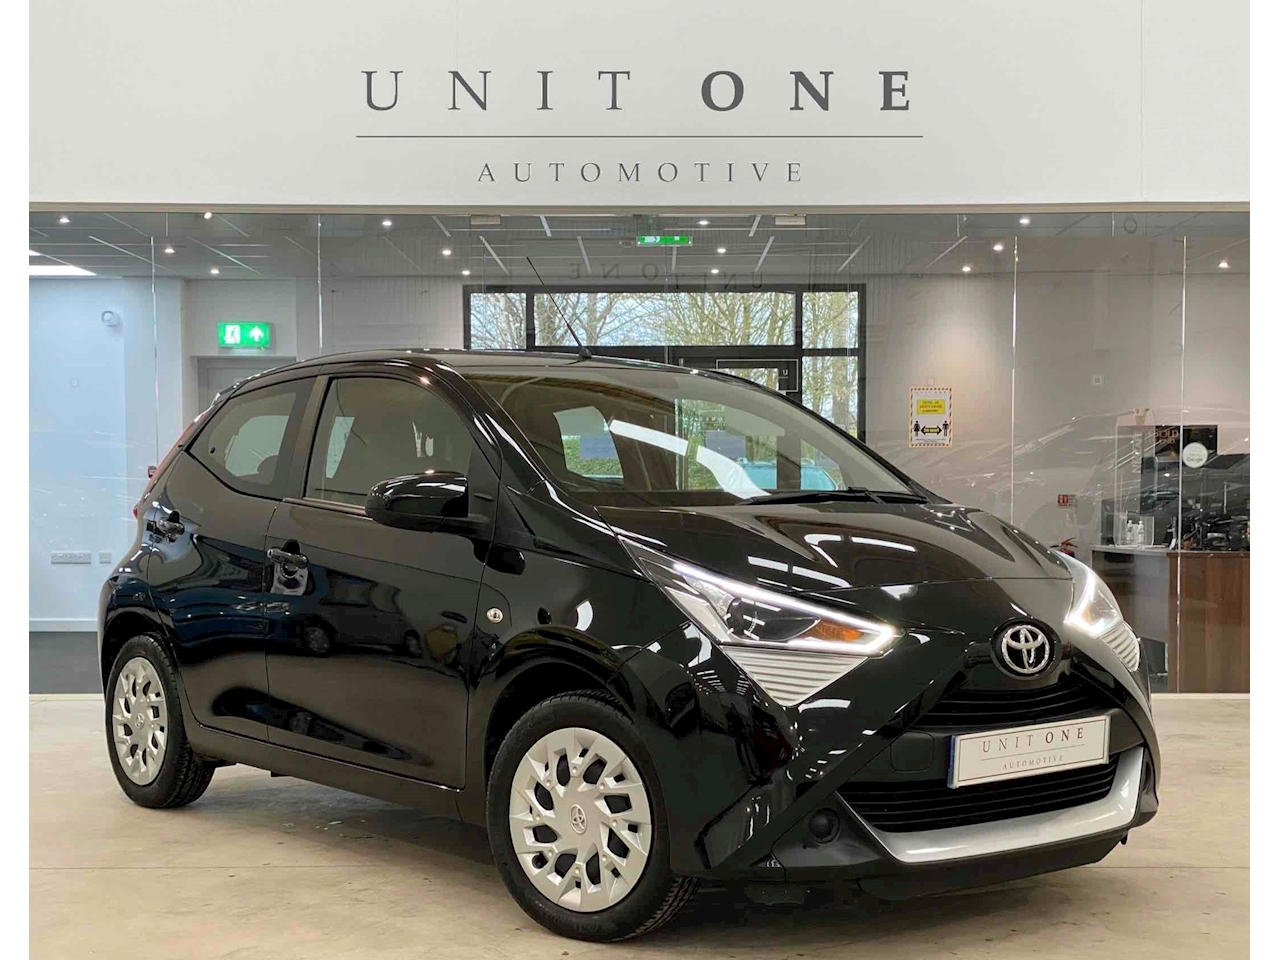 Used 2018 Toyota AYGO VVT-i x-play Hatchback 1.0 Automatic Petrol For Sale  in West Sussex